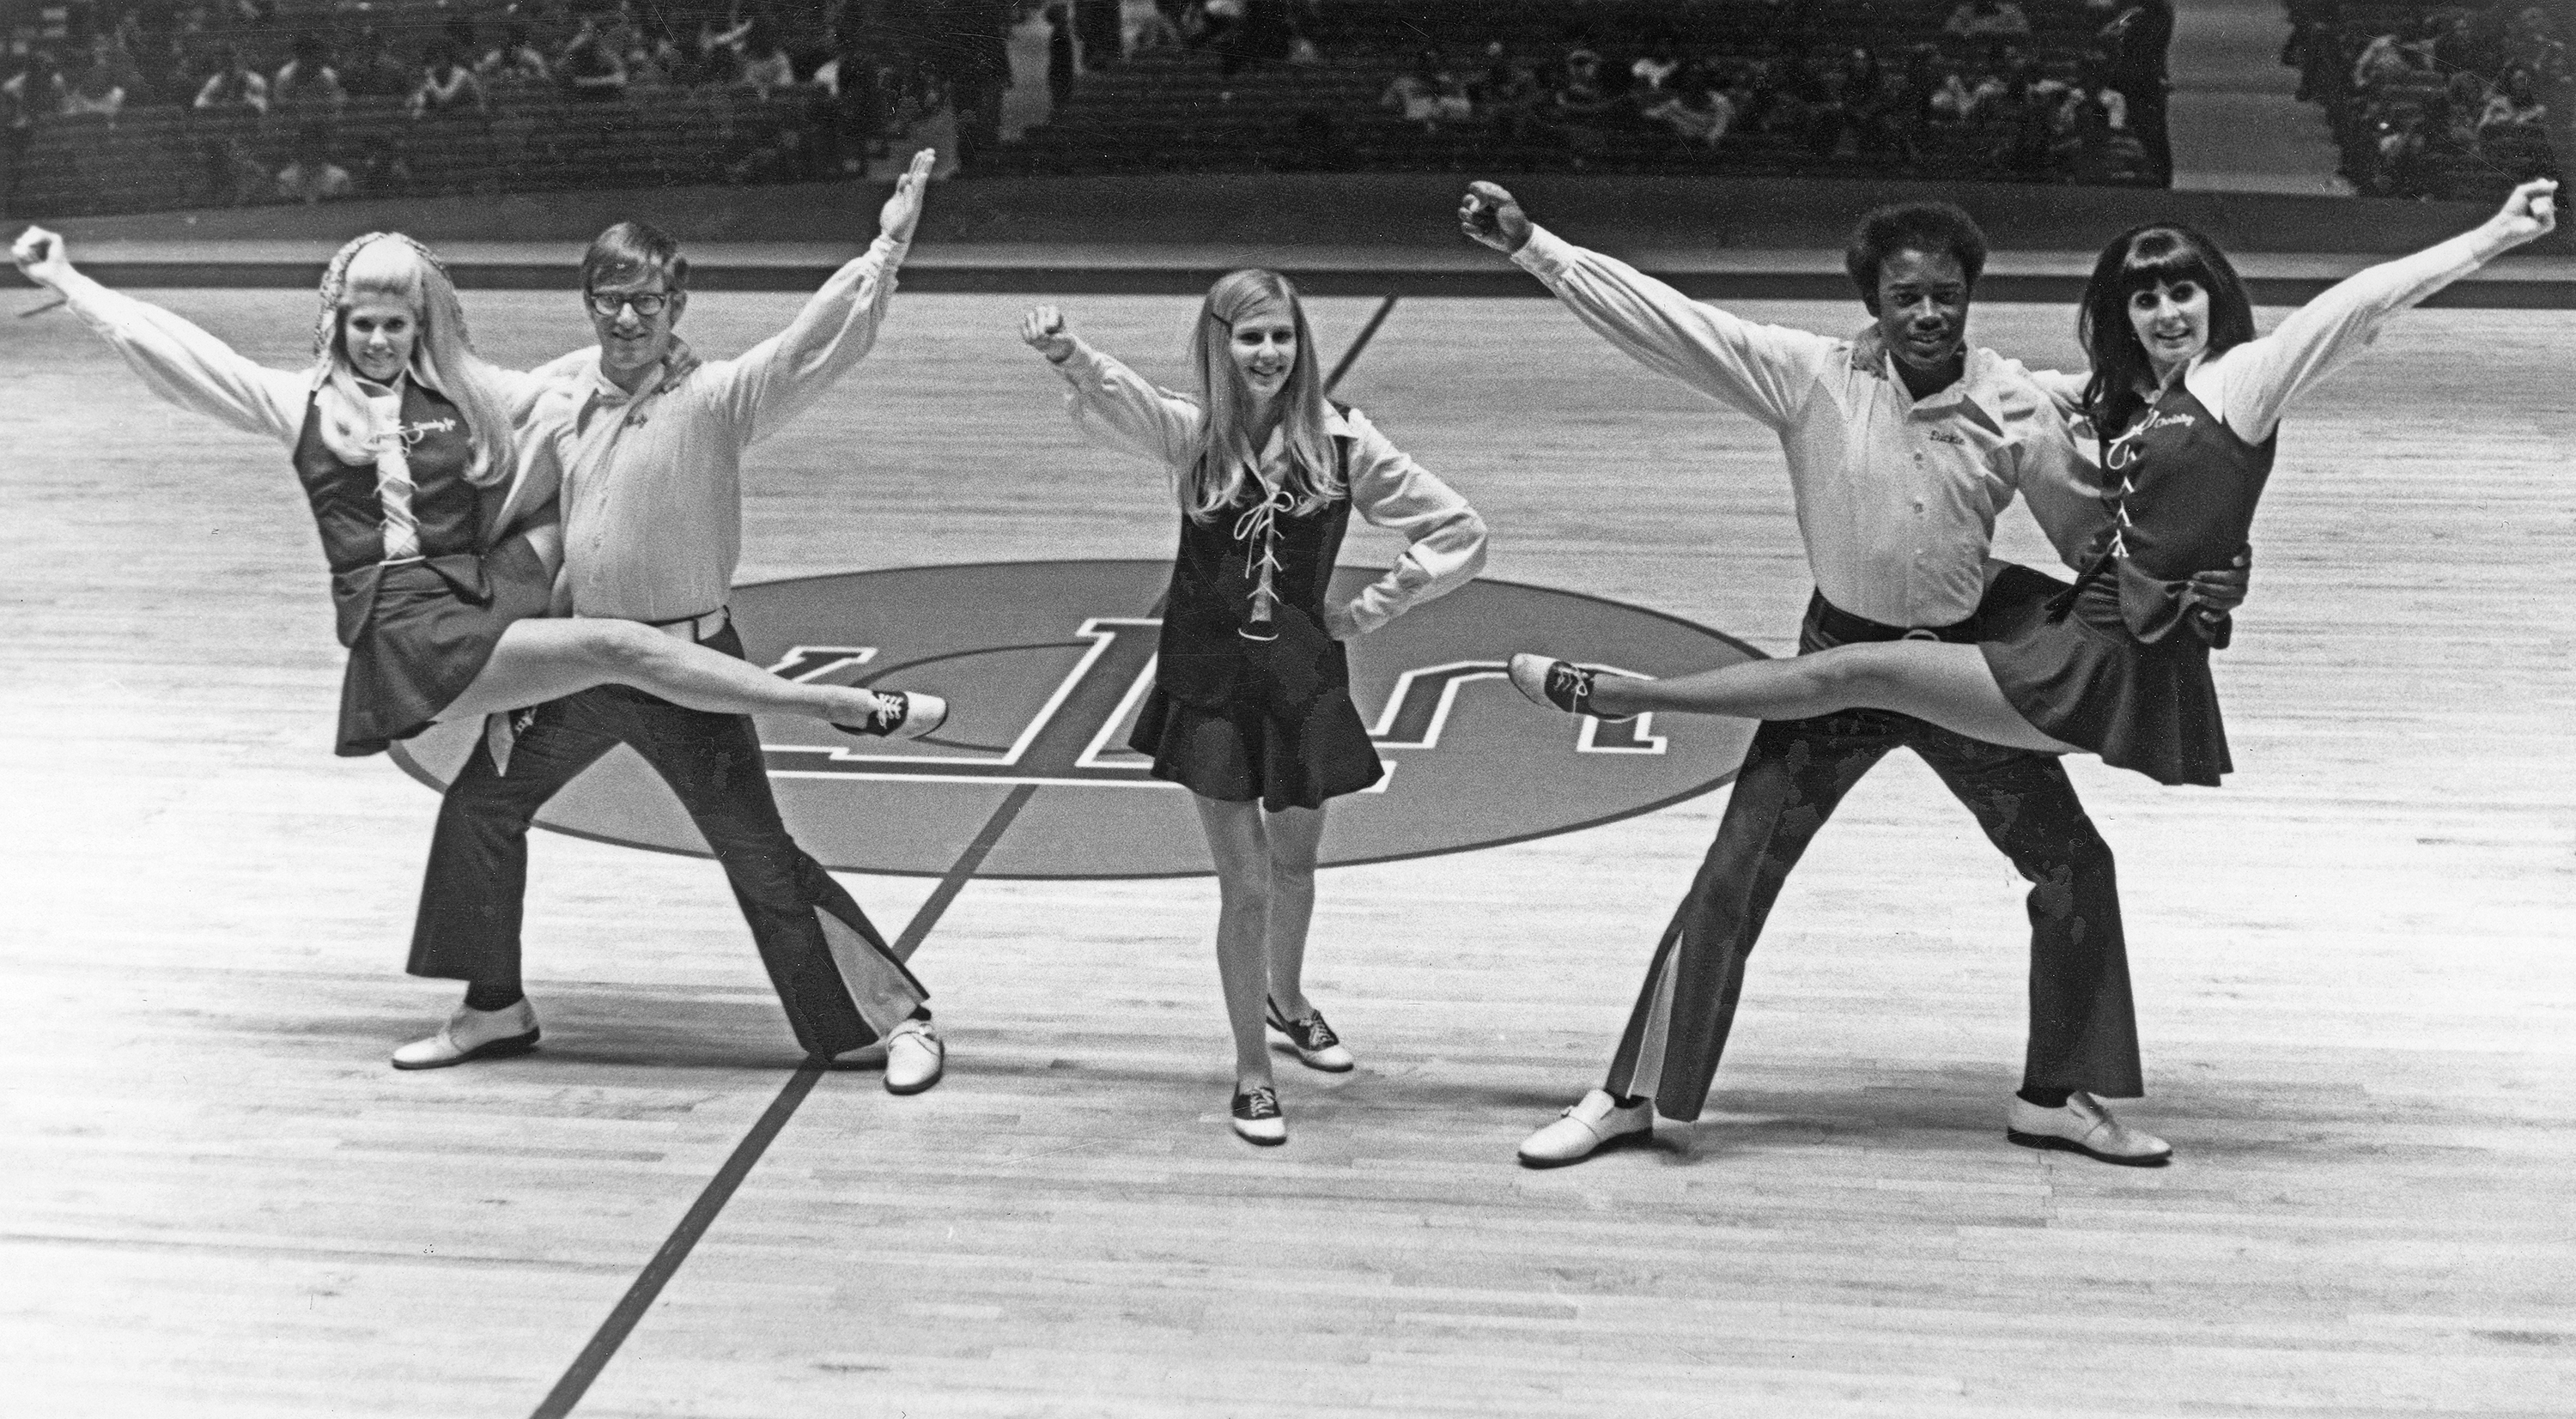 Black and white photo of a group of cheerleaders posed on a basketball court.